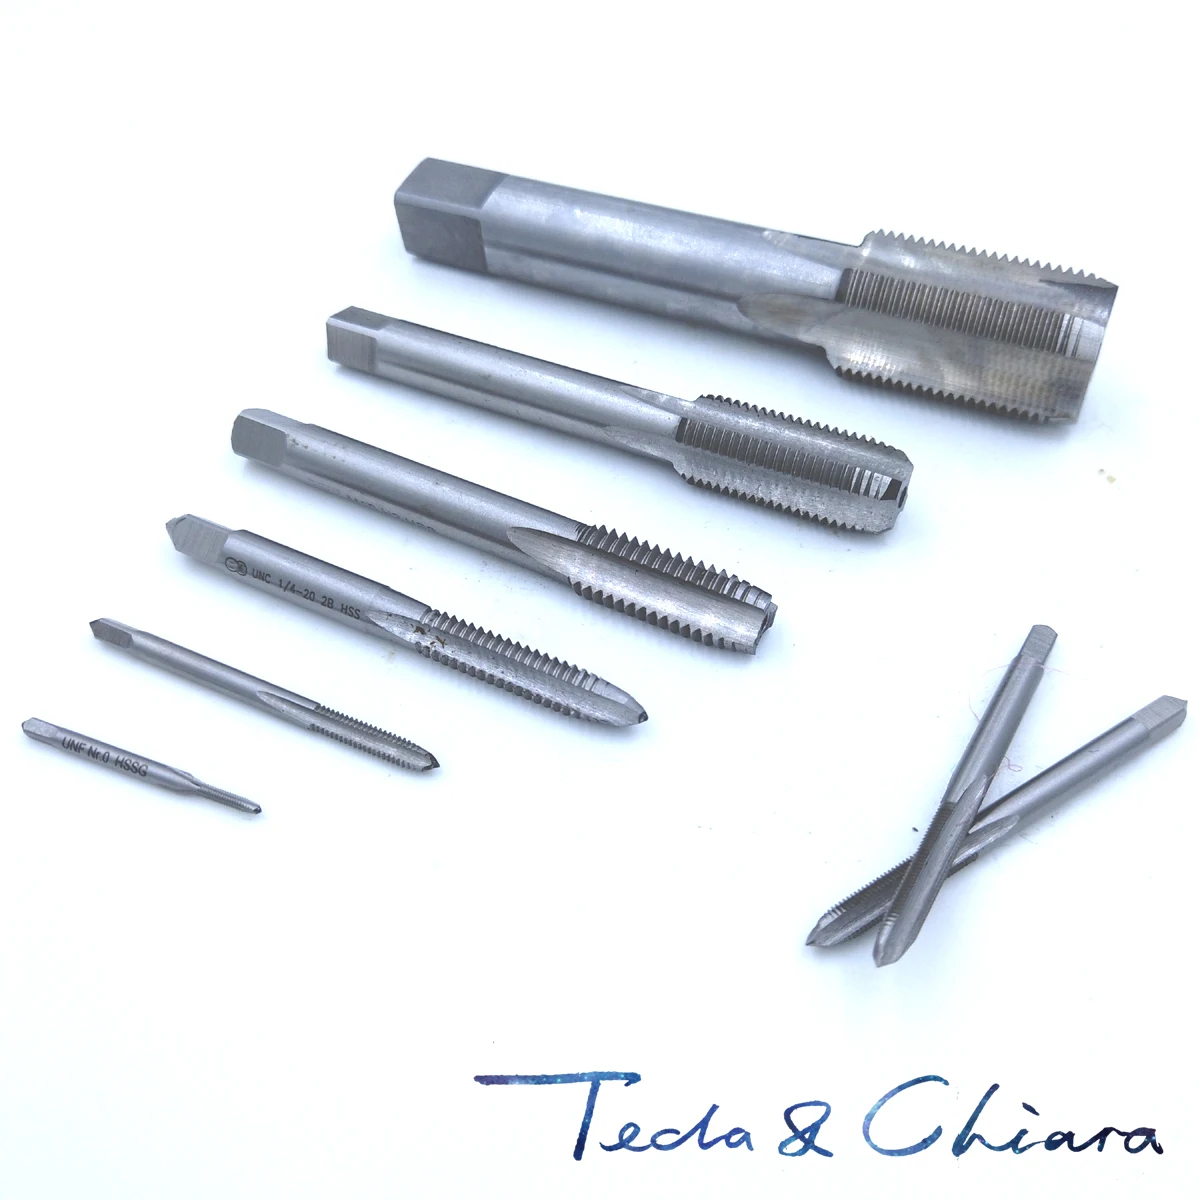 5/8-28 5/8-32 5/8-36 5/8-40 UN UNS HSS Right hand Tap TPI Threading Tools For Mold Machining 5/8 5/8" - 28 32 36 40